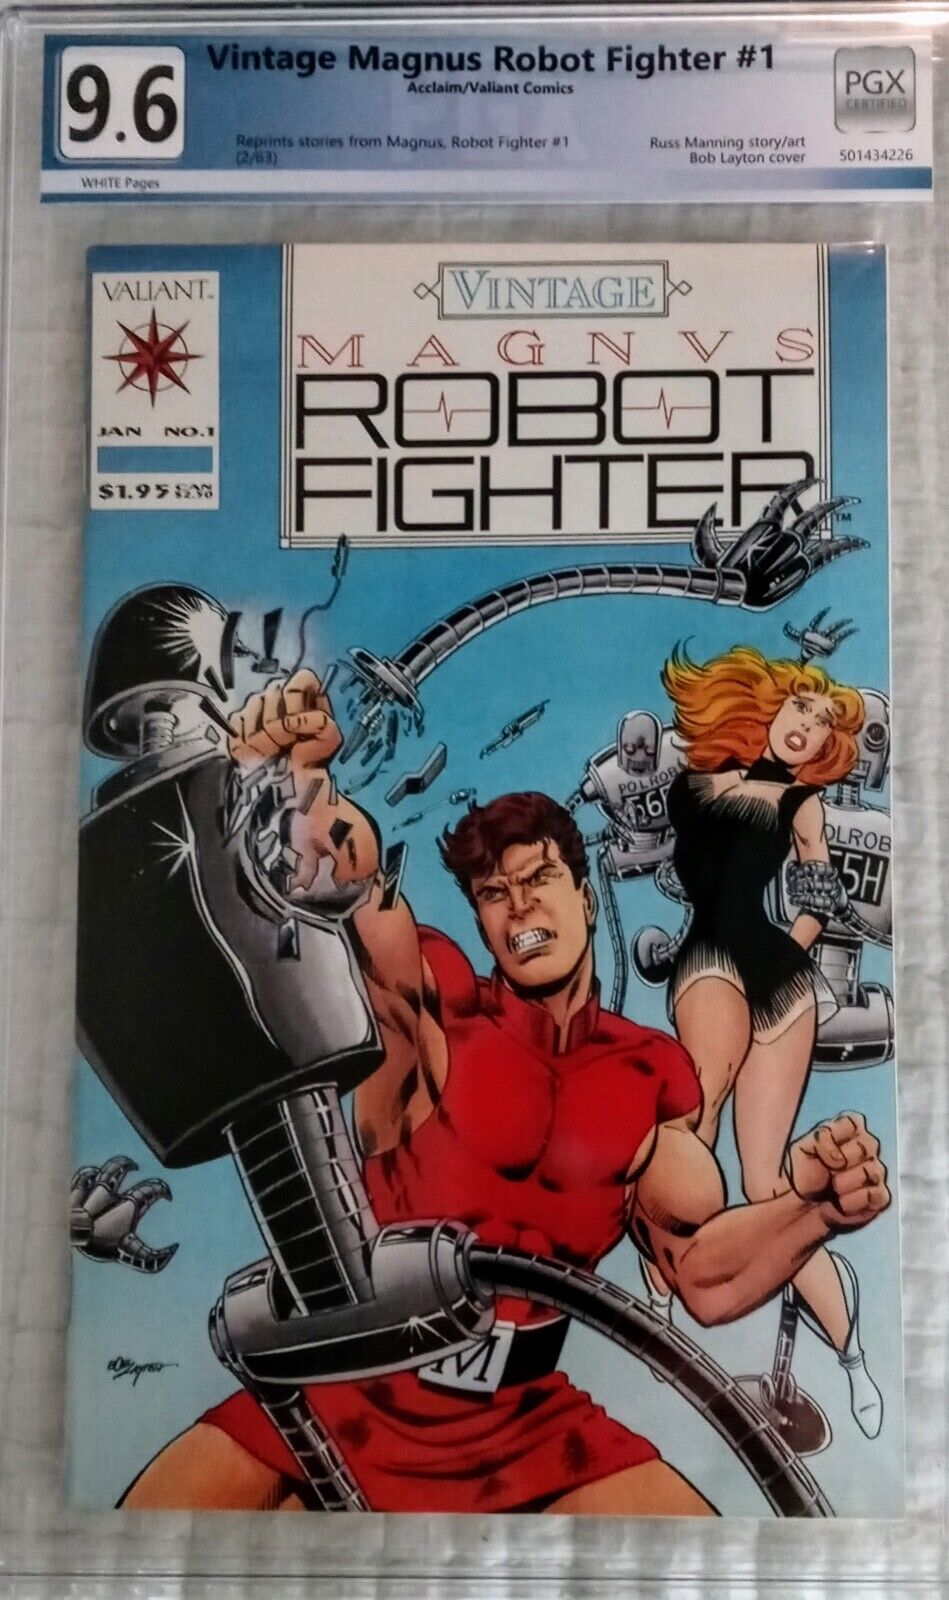 VINTAGE MAGNUS ROBOT FIGHTER #1 PGX 9.6 VALIANT FIRST 1’ST ISSUE - CGC CBCS EGS